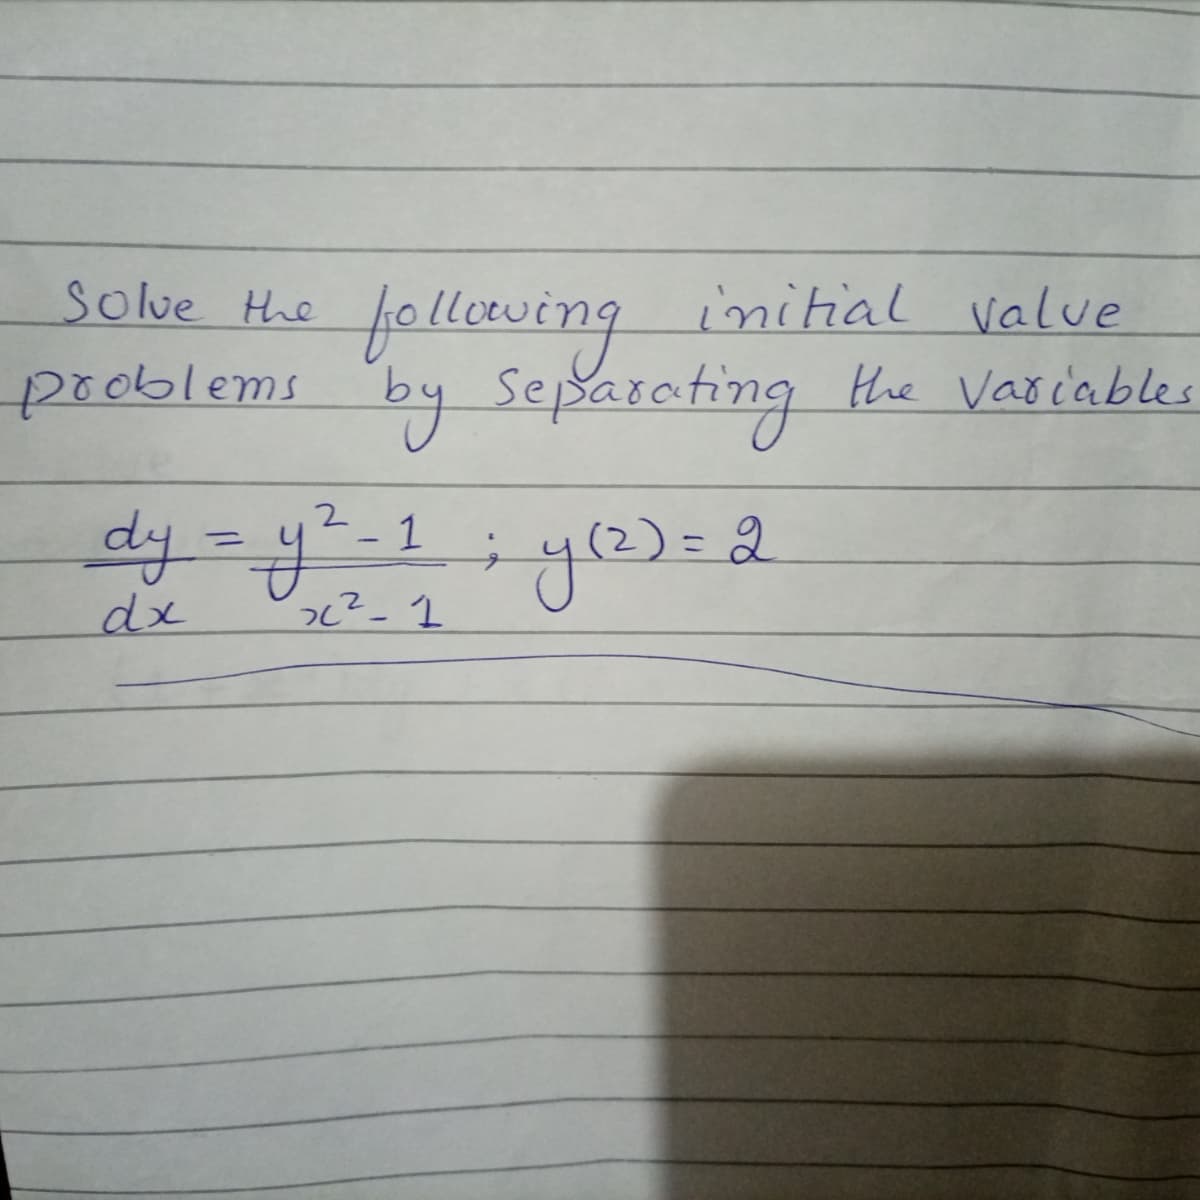 follerving initial value
by Separating the Variables
Solve the
problems
- 1
%3D
%3D
dx
